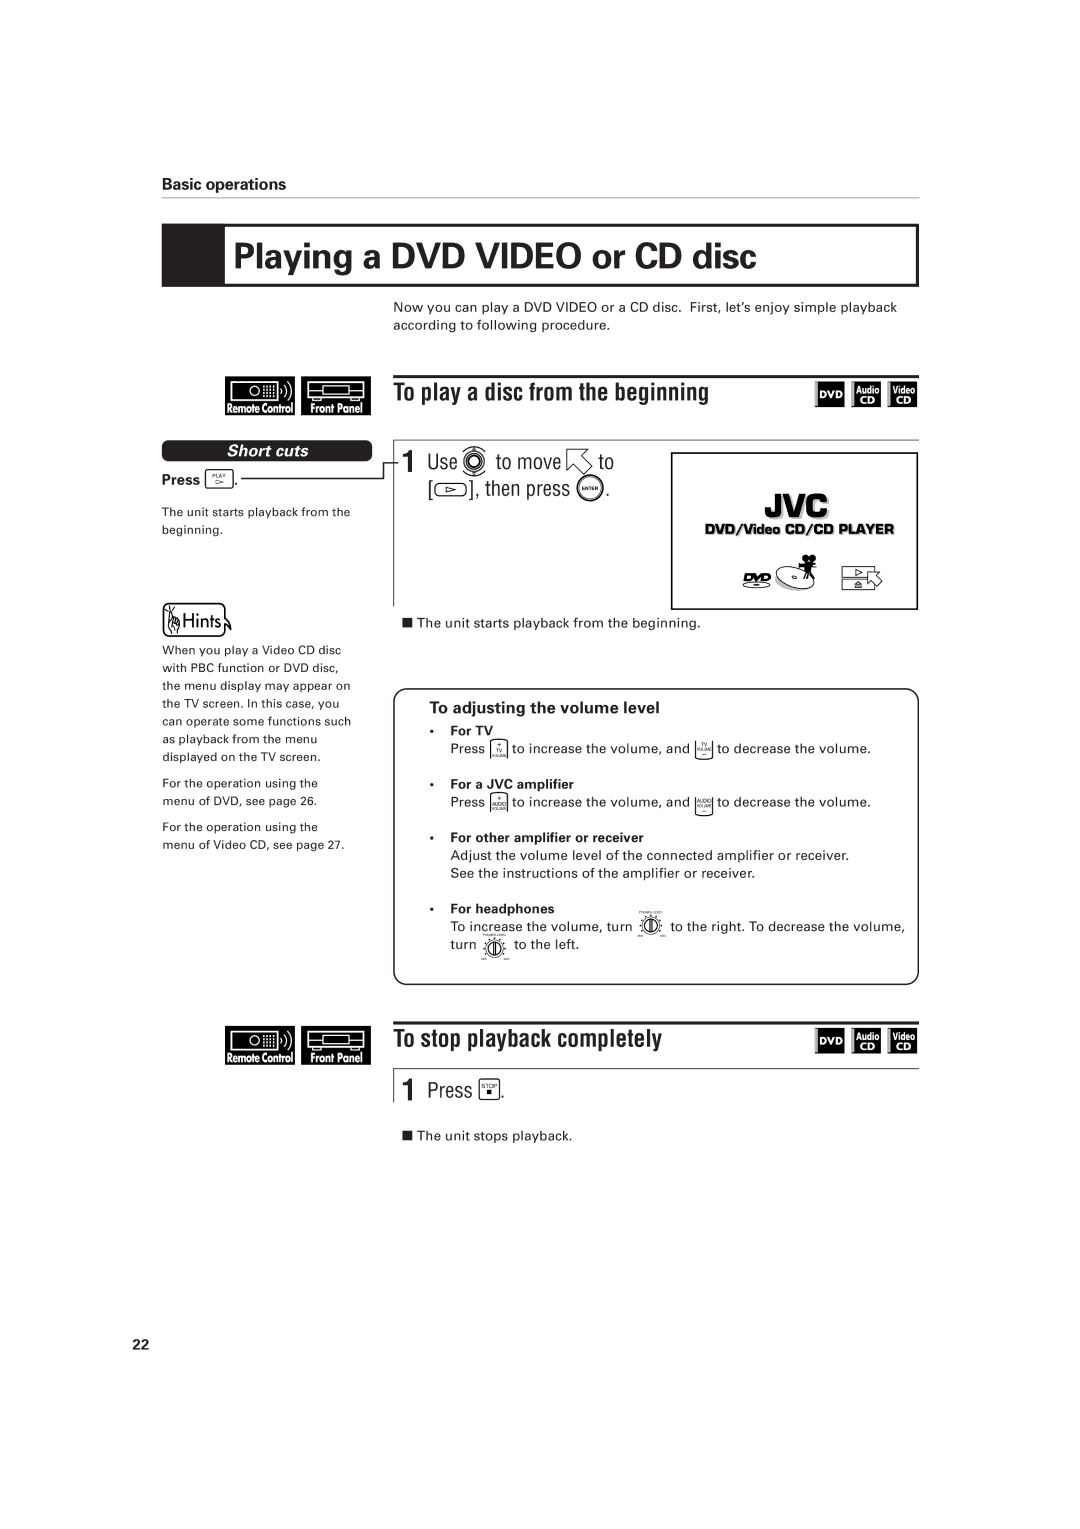 JVC XV-D701BK Playing a DVD Video or CD disc, To play a disc from the beginning, To stop playback completely, Press Stop 